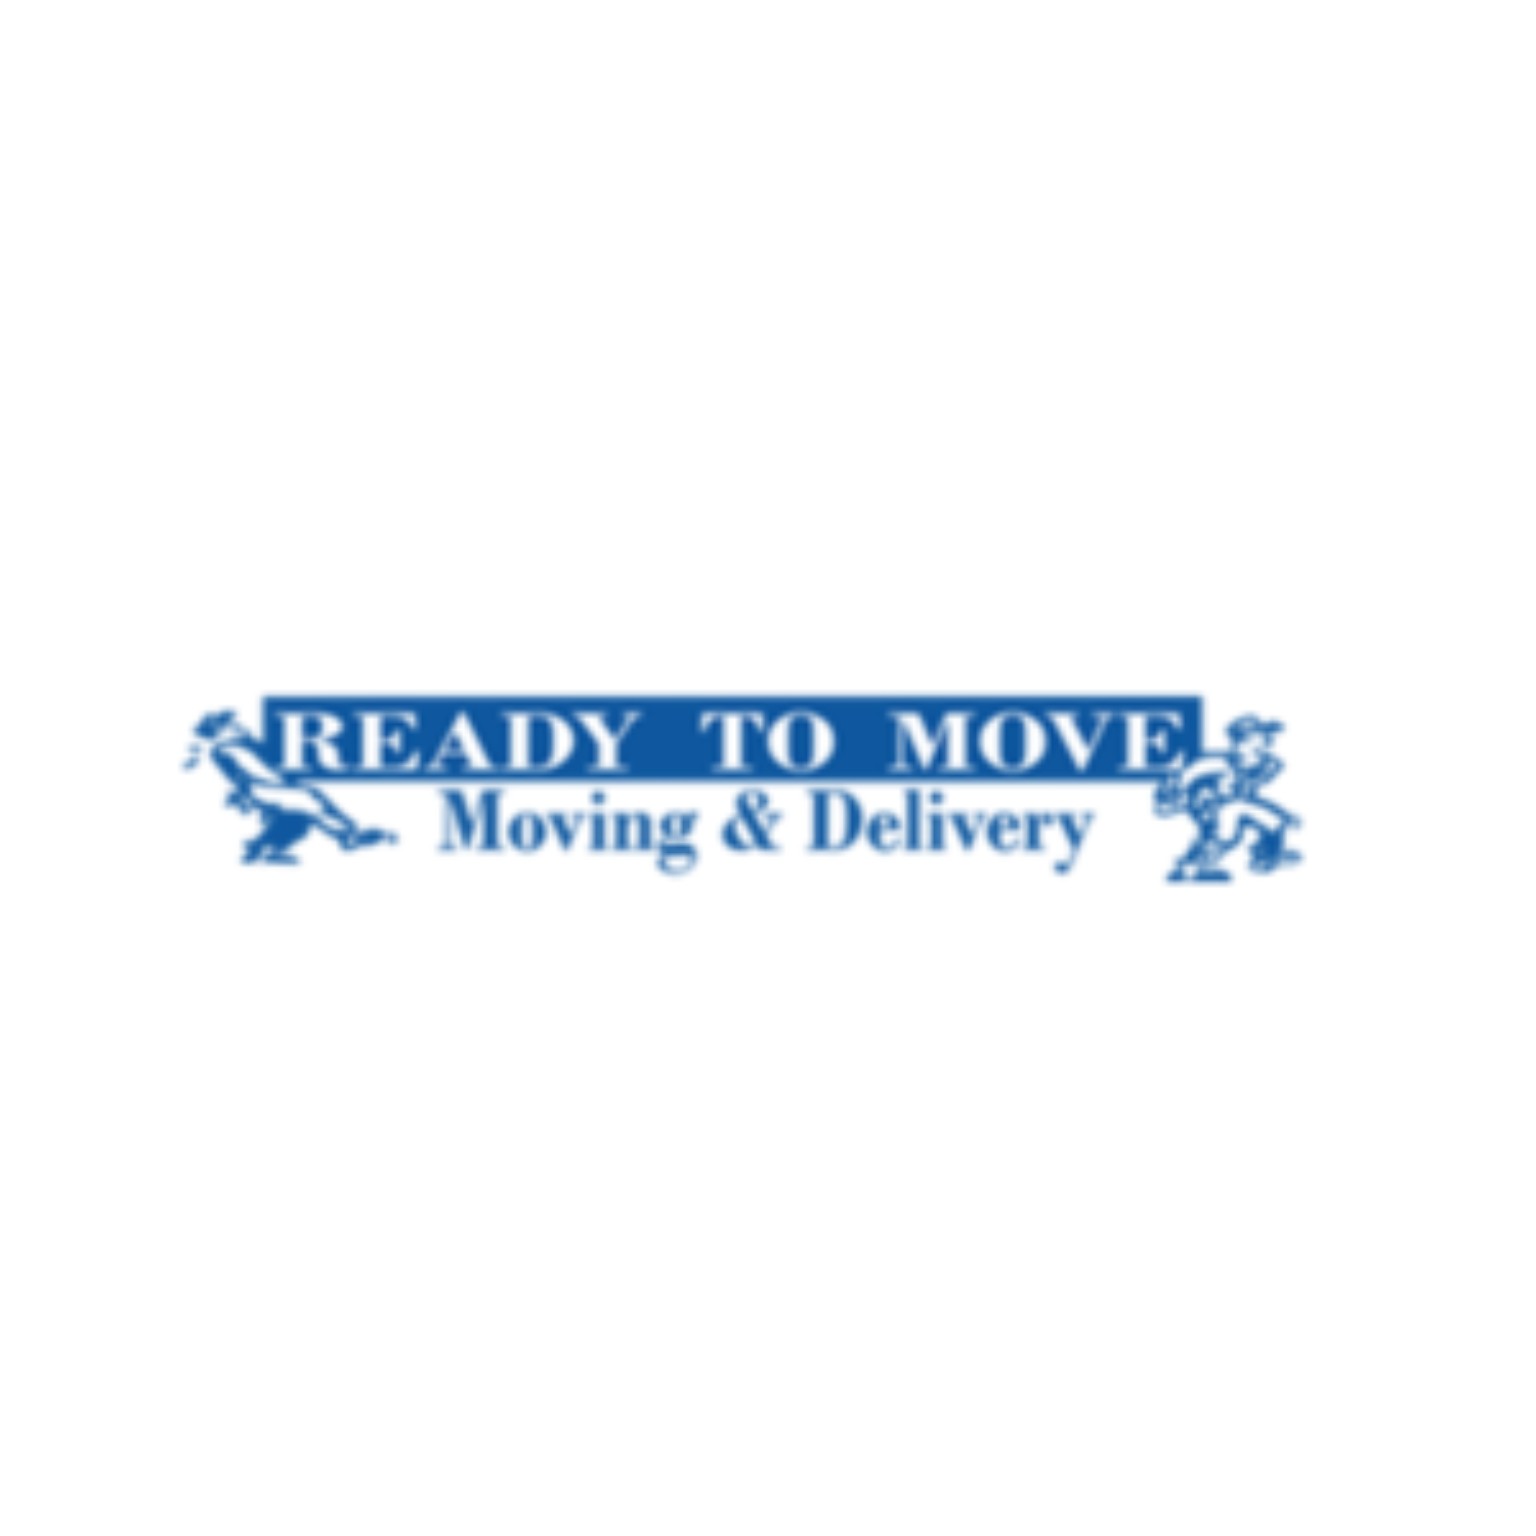 Best Residential Moving Services In Macon | Ready To Move LLC